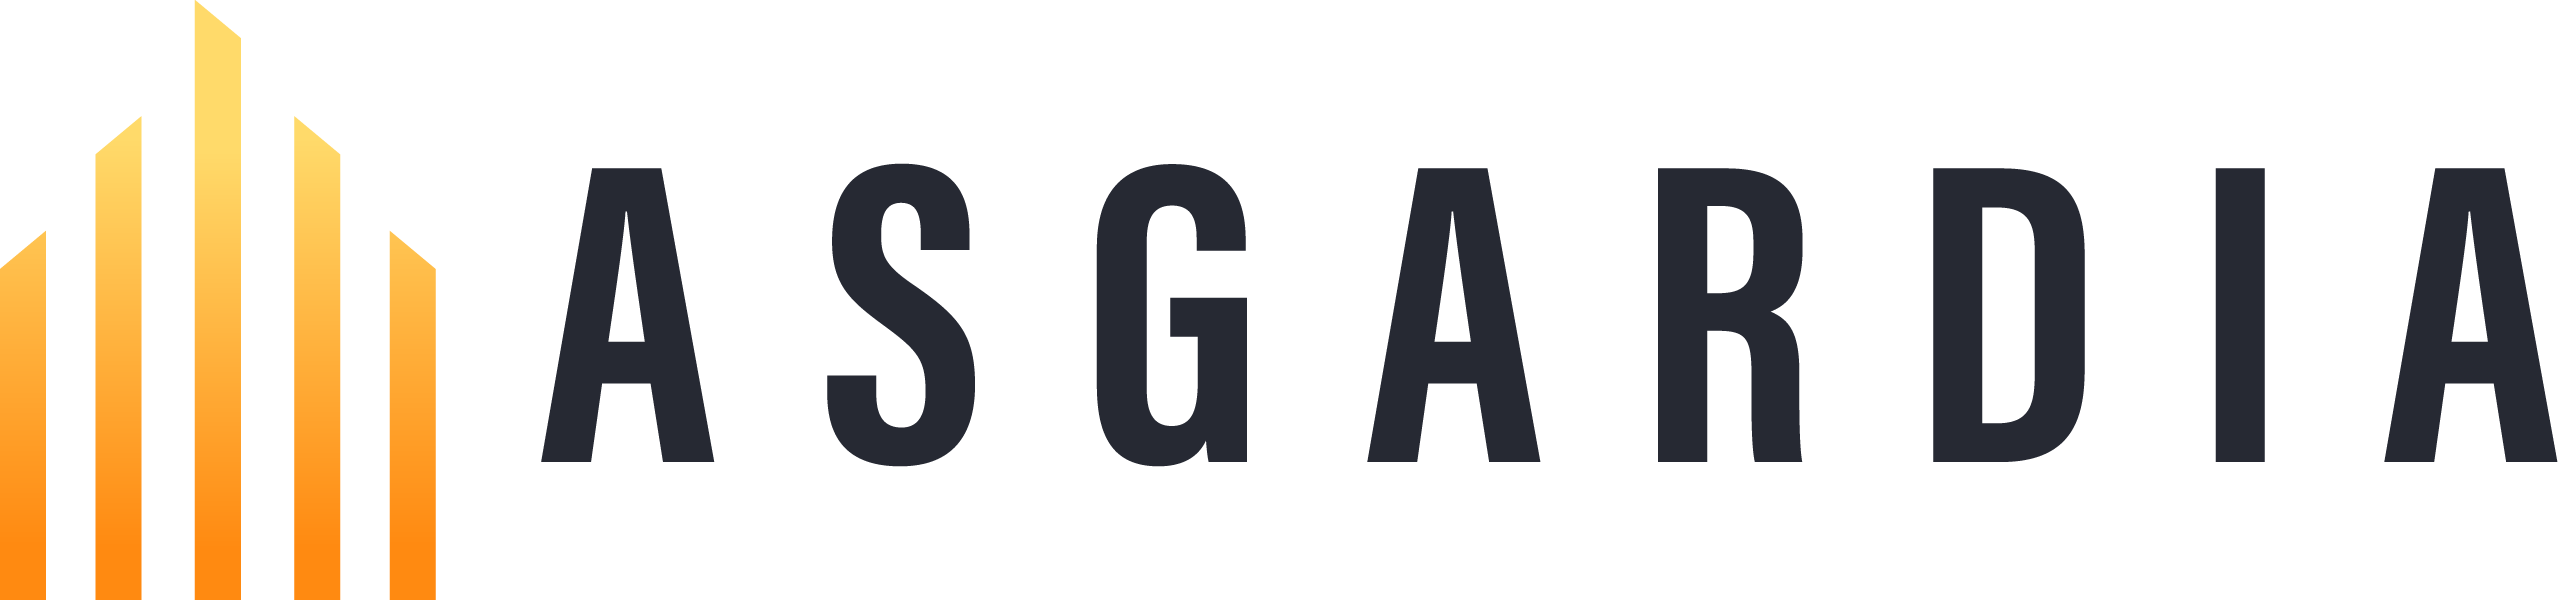 A black background with the word " game ".